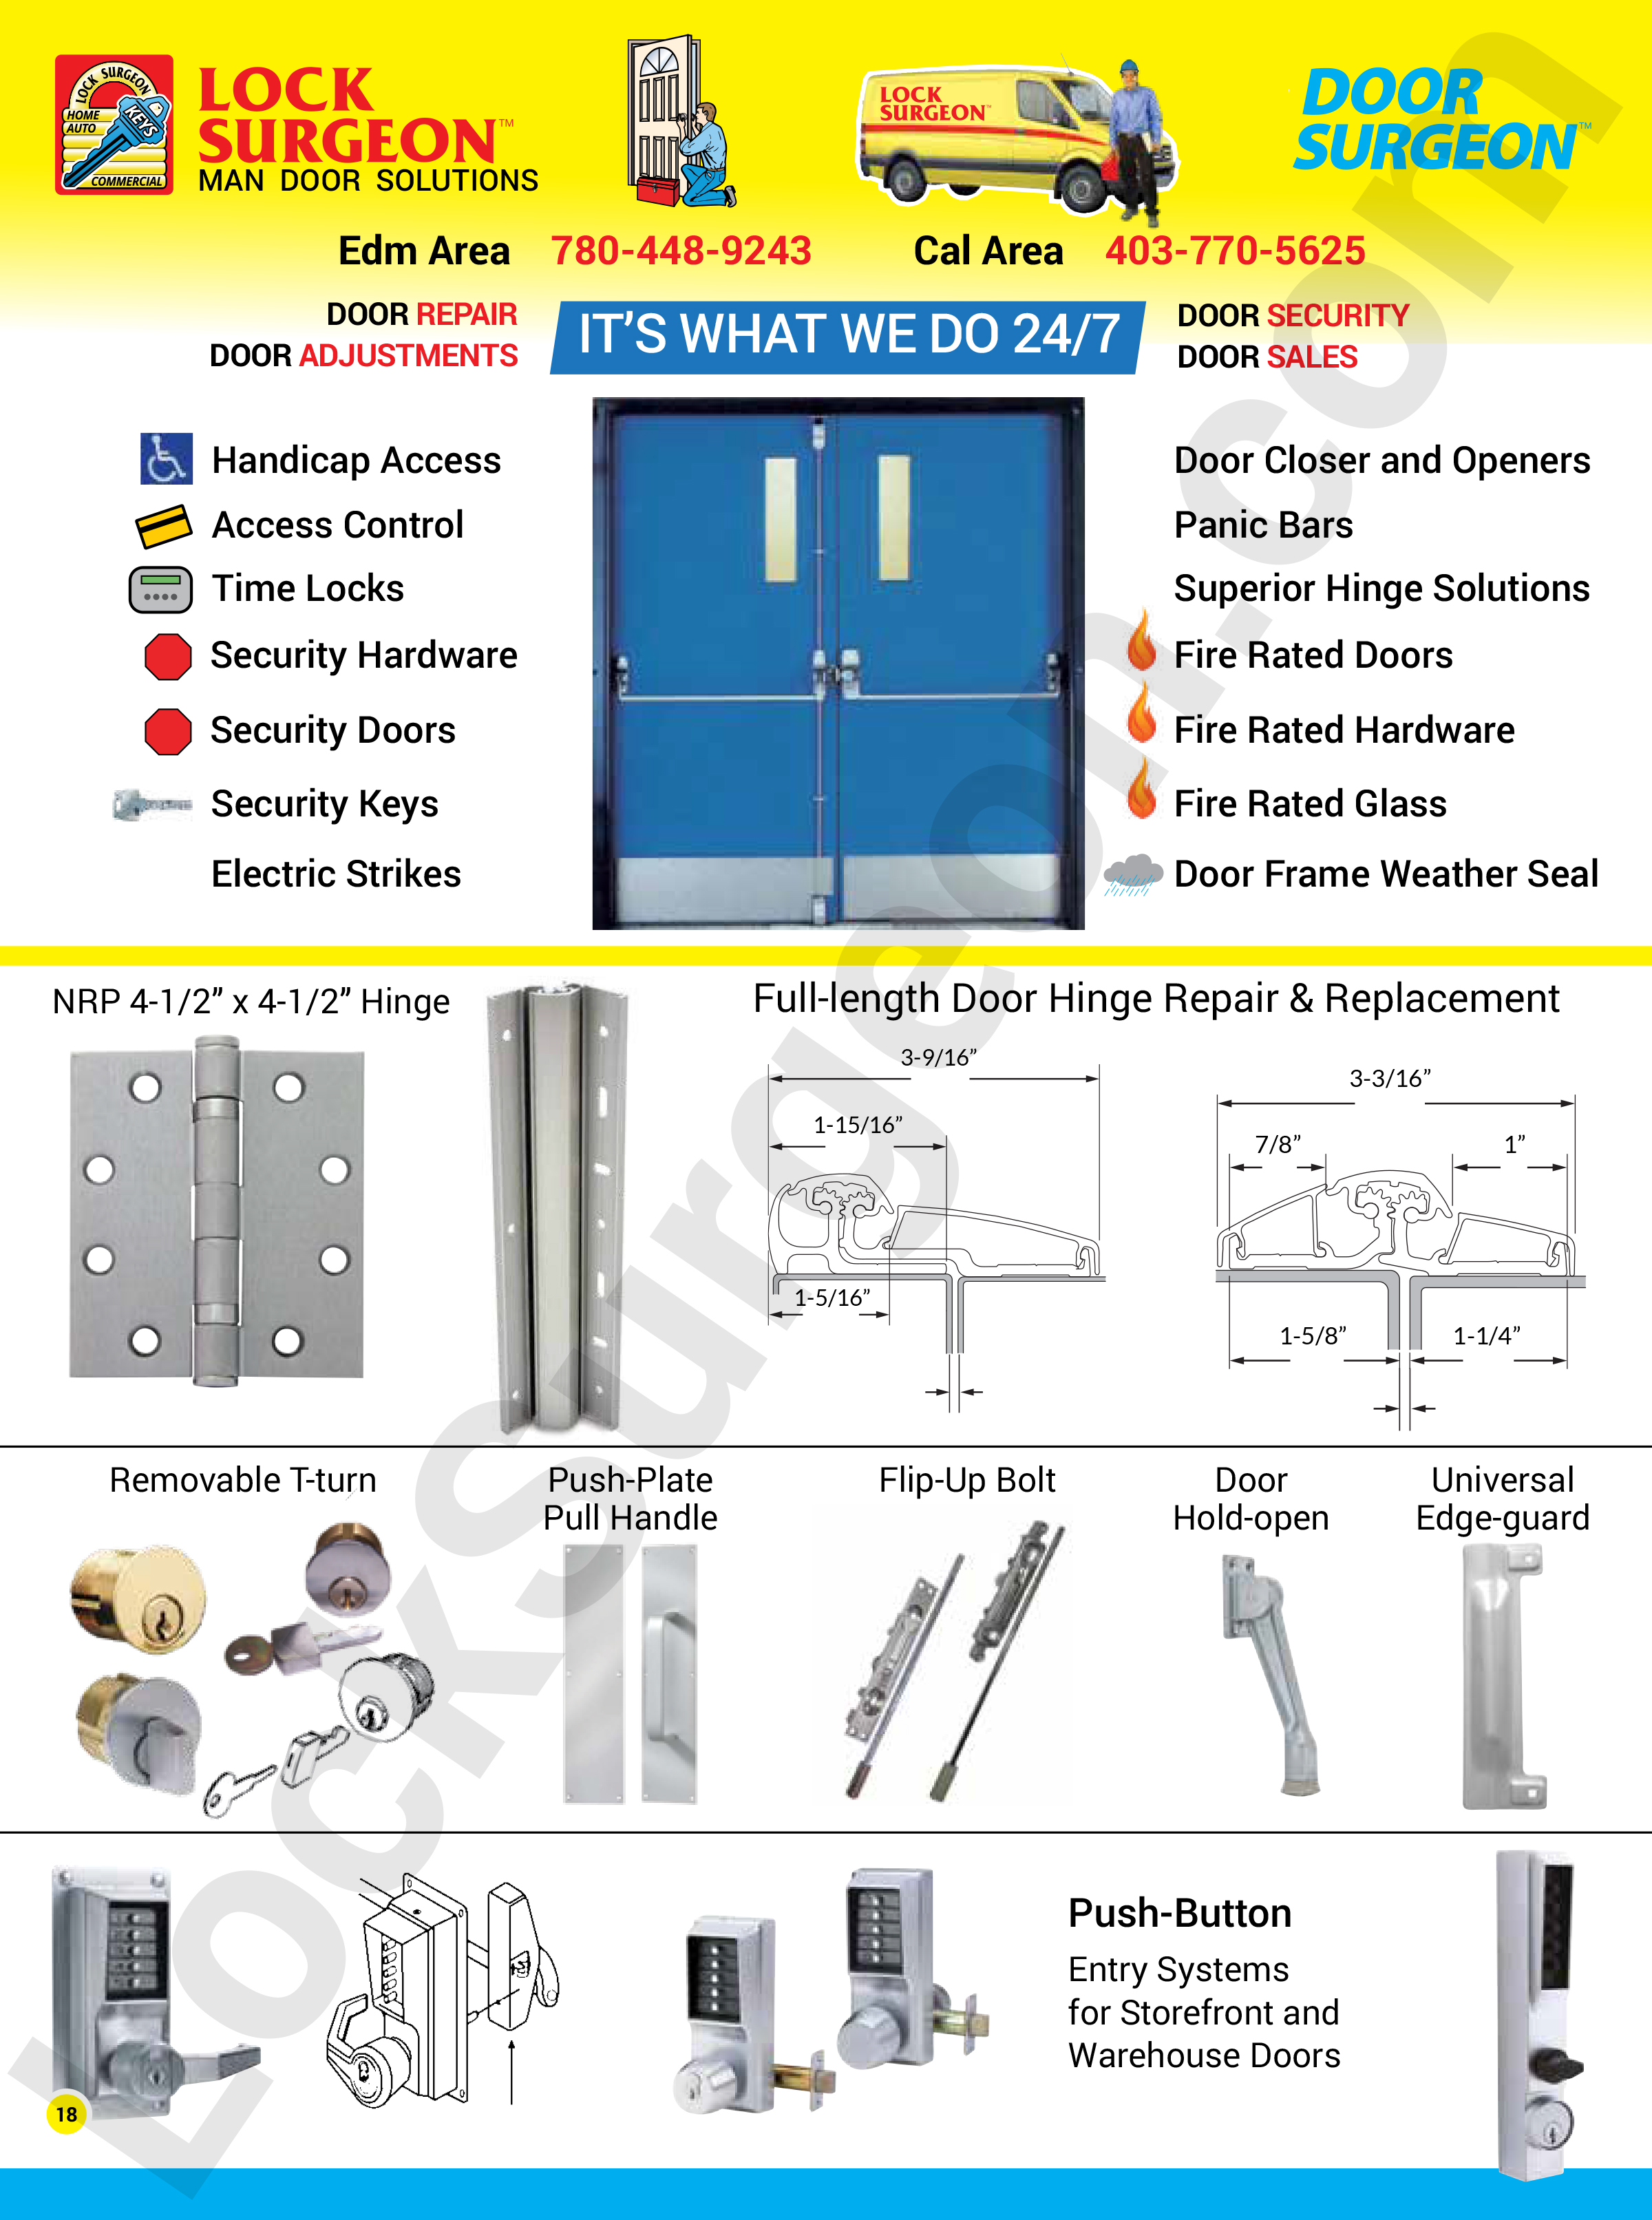 Steel doors for business and commercial properties. Repair and installation for steel doors, handicap access points, access control, time locks, security hardware, security doors, security keys, electric strikes, door closers, door openers, panic bars, superior hinges, fire rated doors, fire rated hardware, fire rated glass, door frame weather seal.